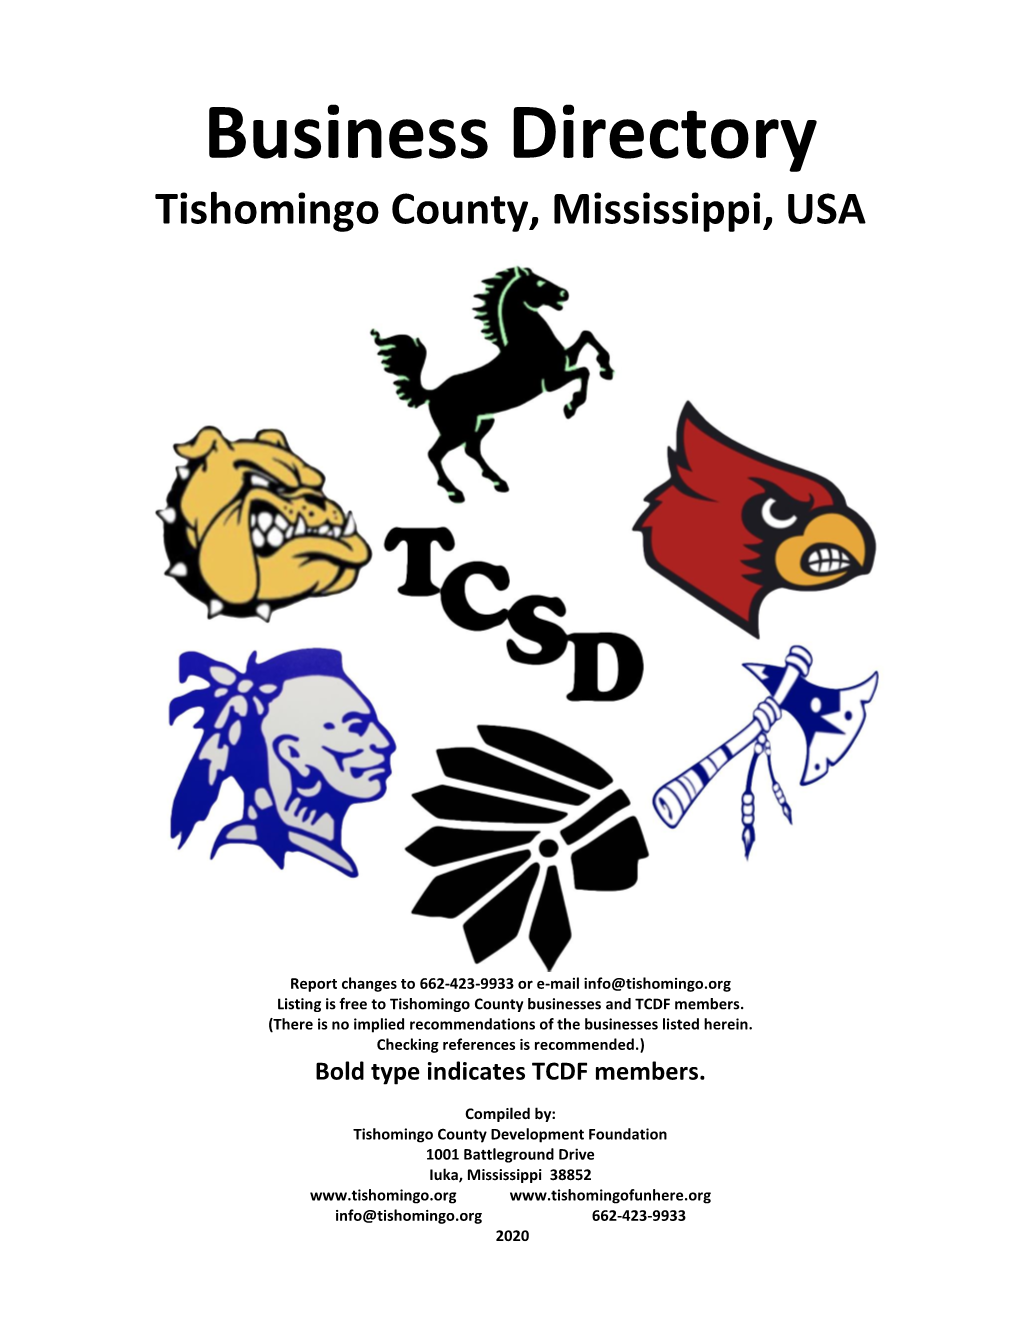 Business Directory Tishomingo County, Mississippi, USA